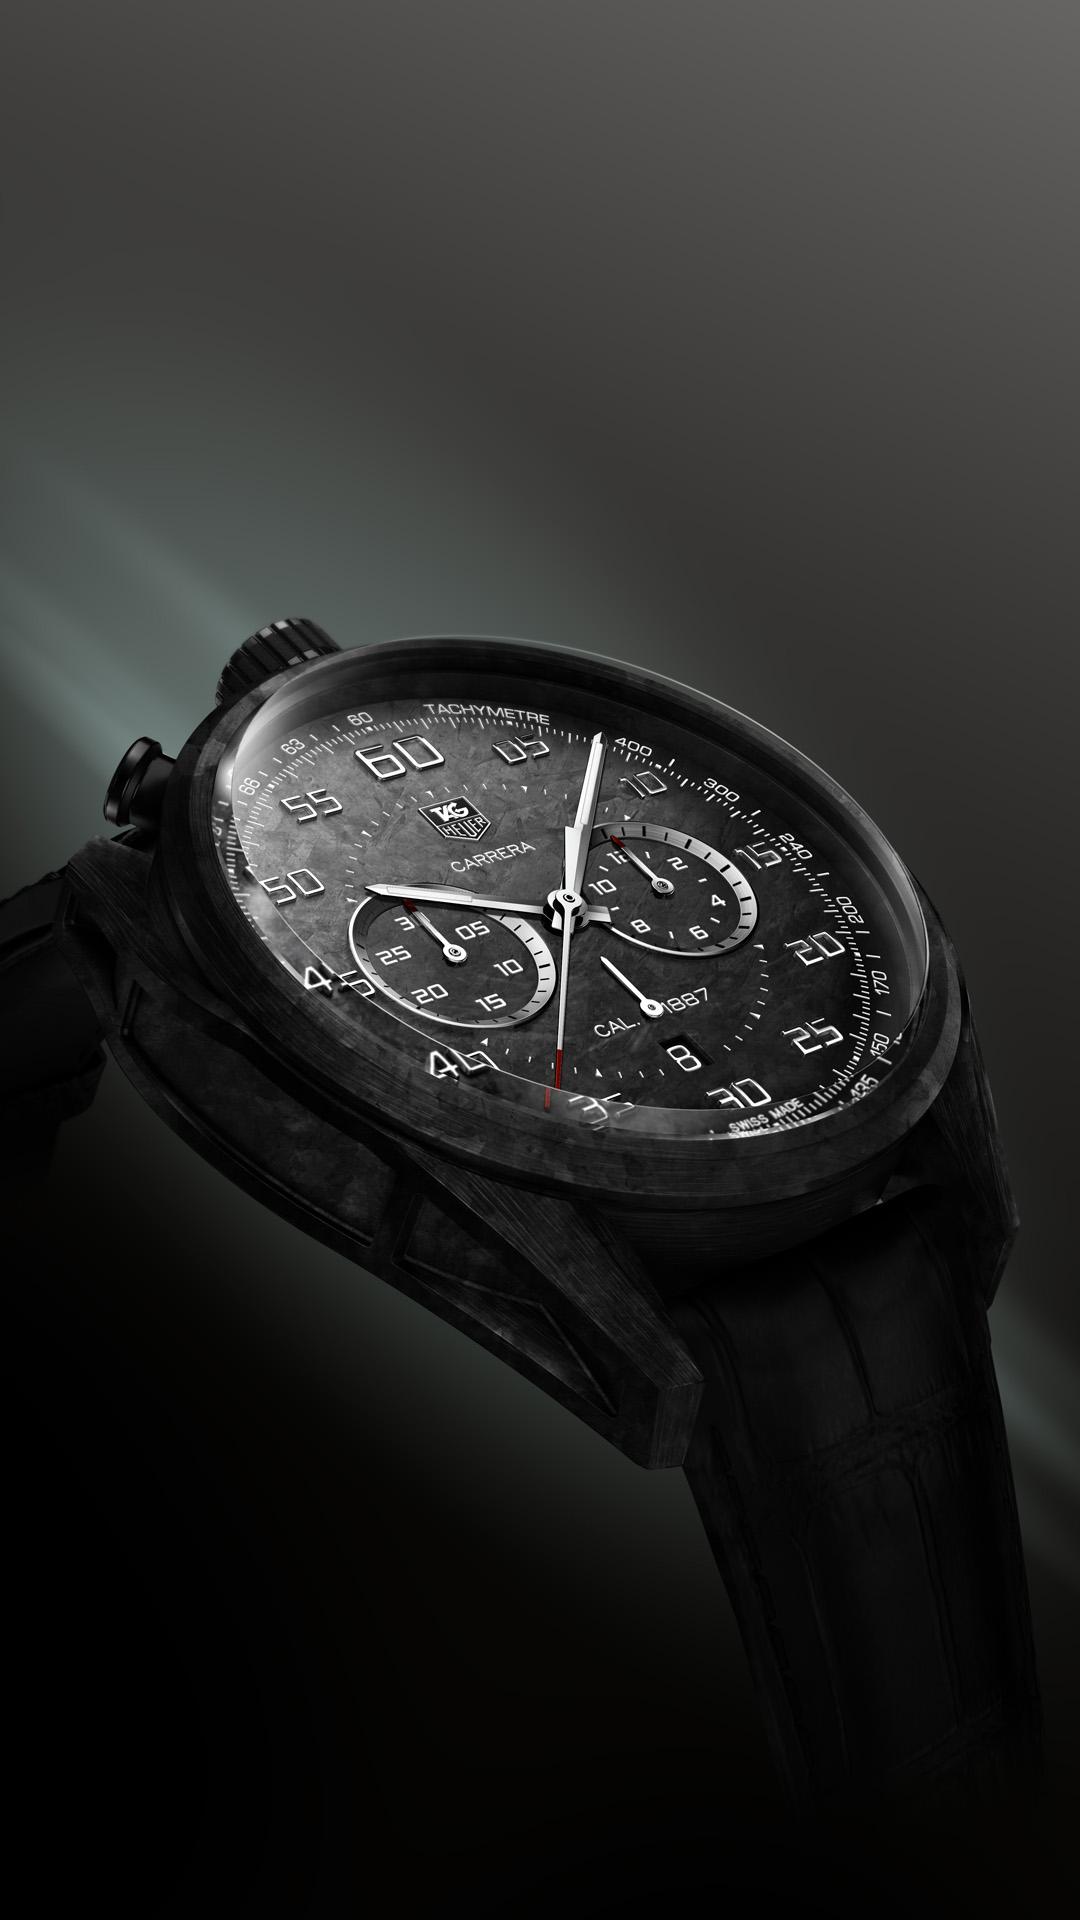 TAG Heuer Carrera htc one wallpaper, free and easy